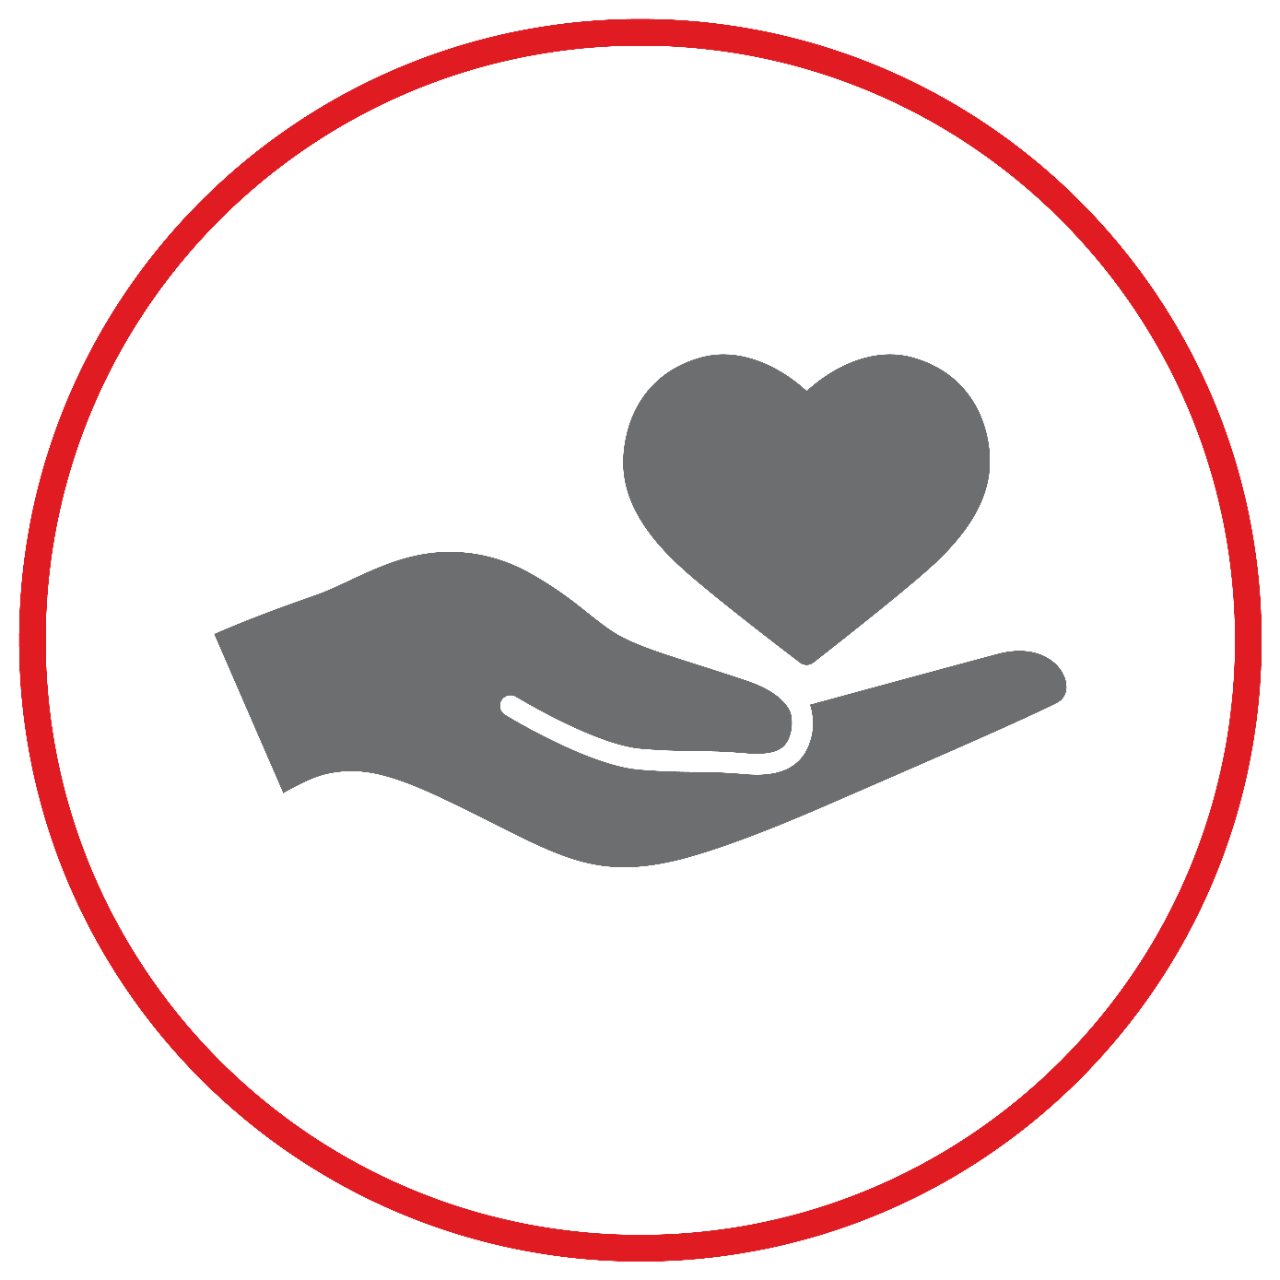 icon of a grey hand holding a stylized heart